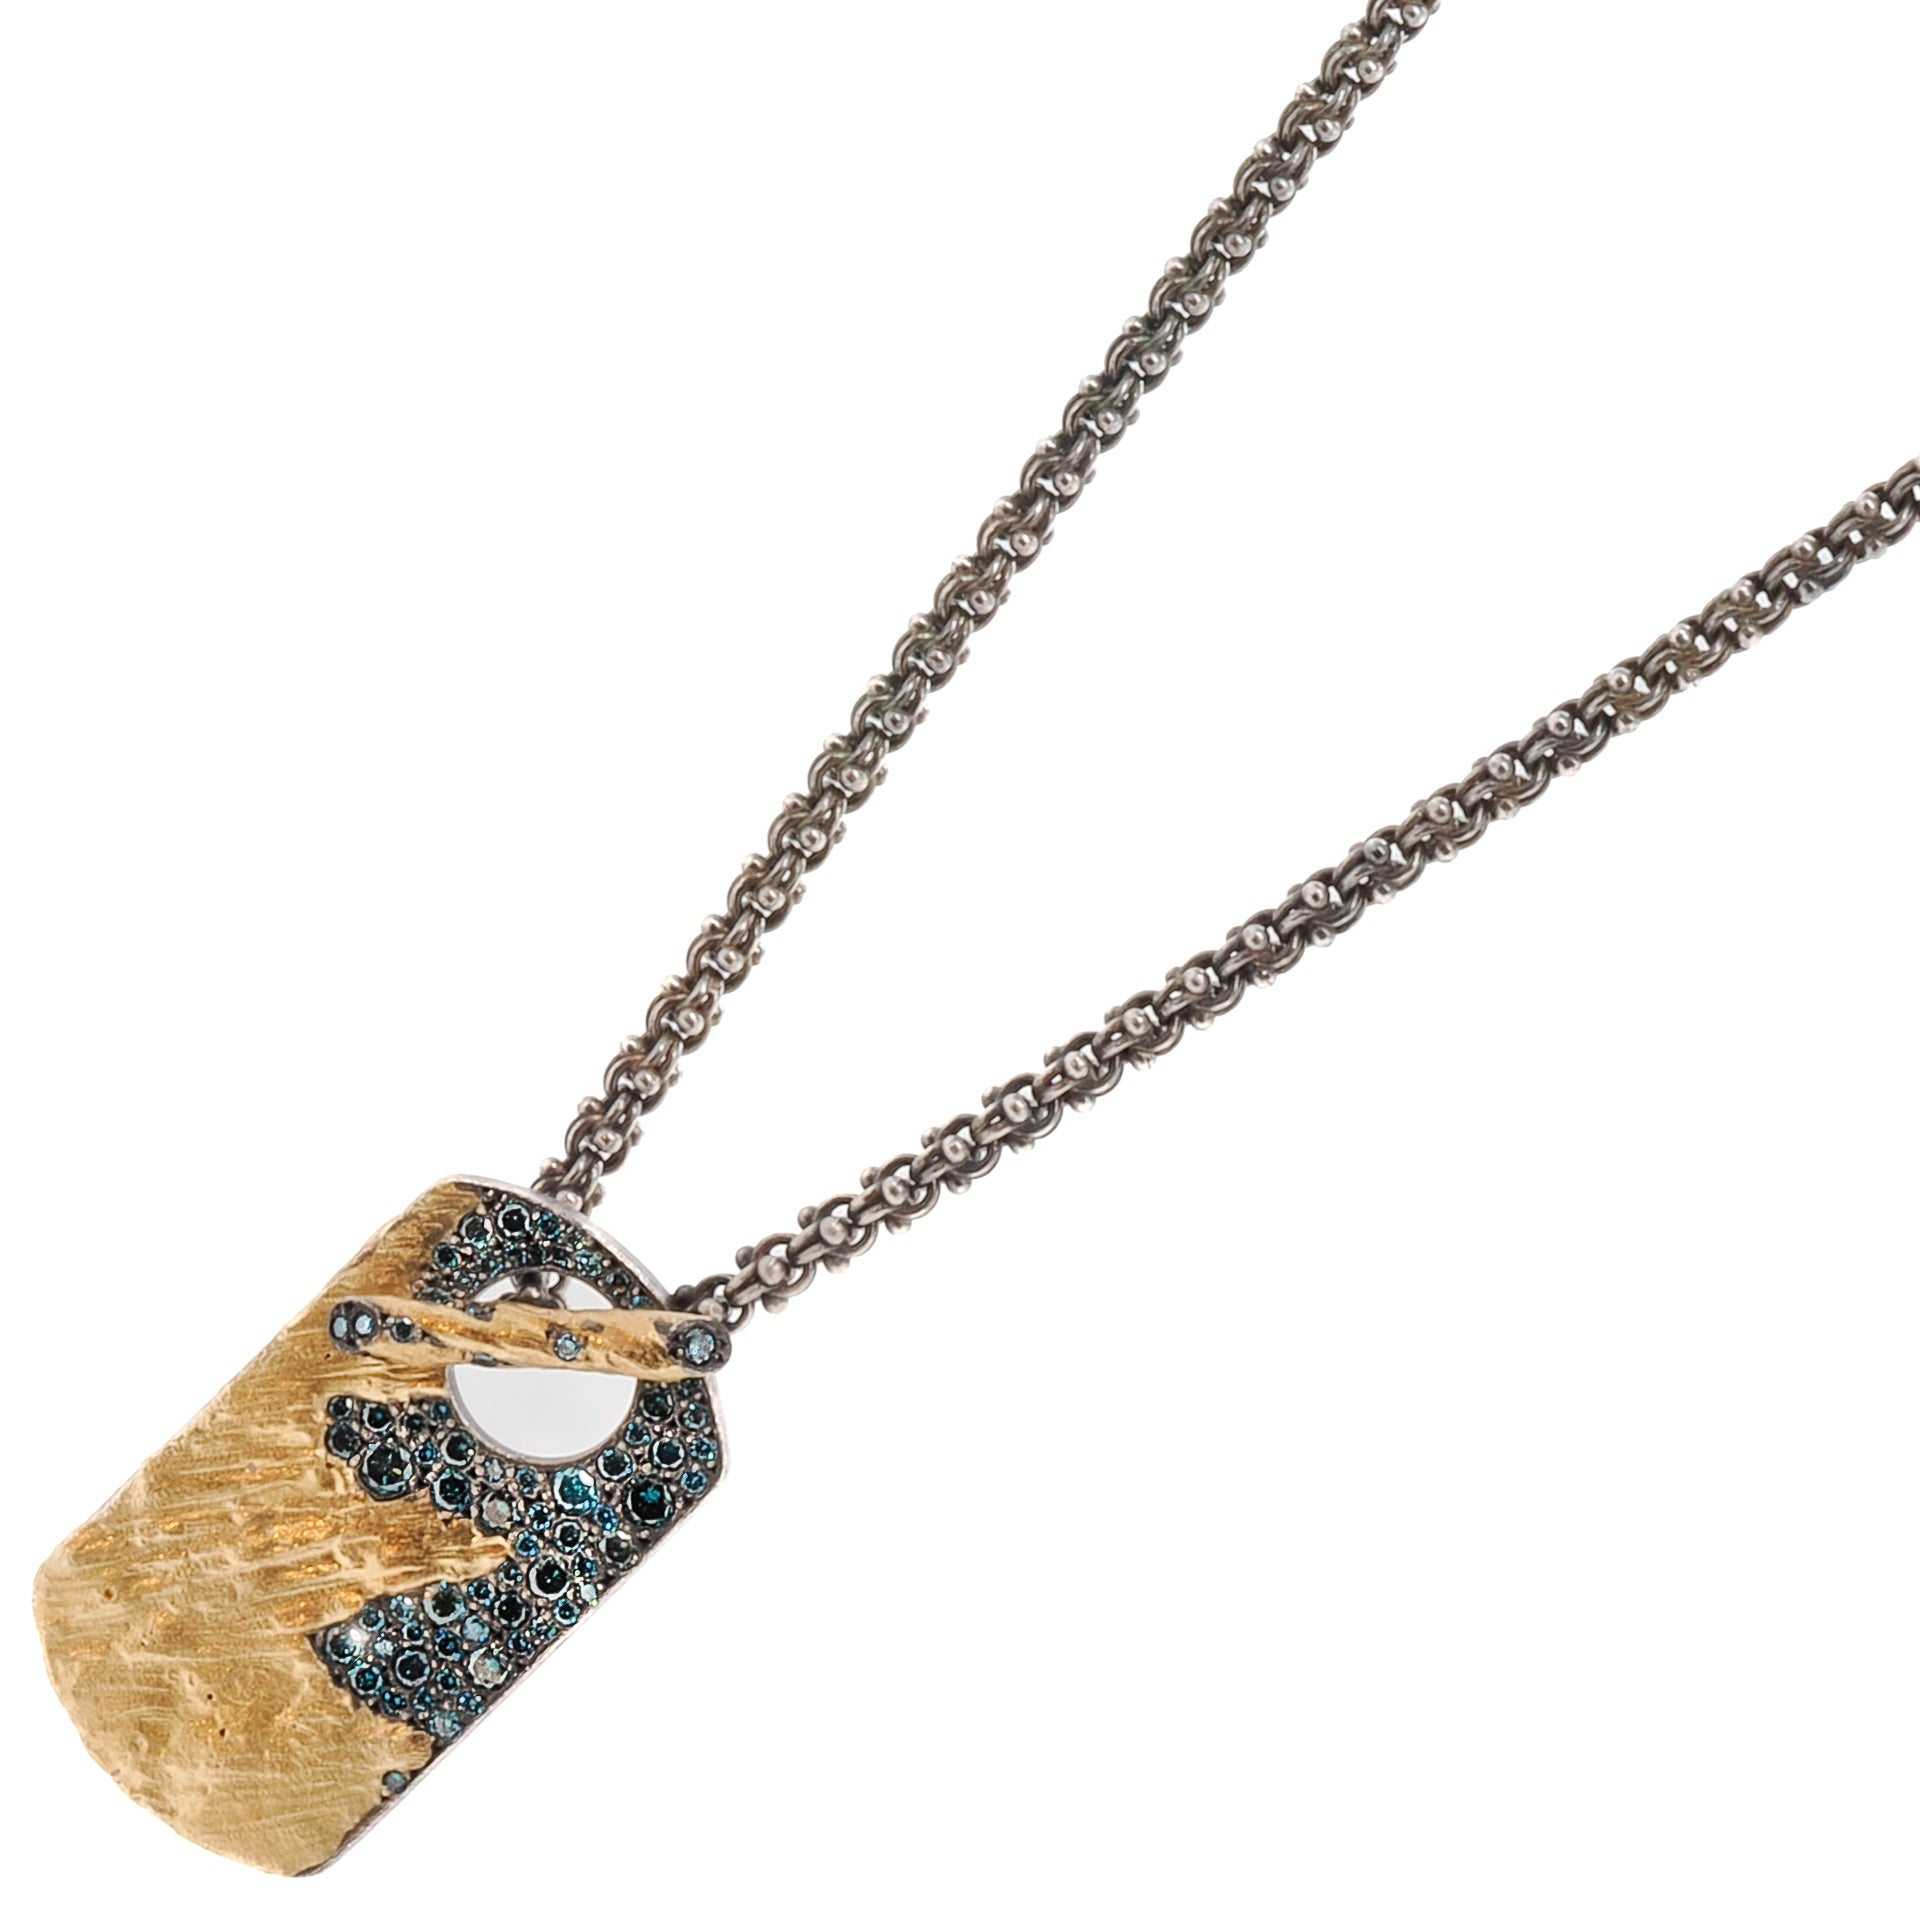 Handmade Elegance - Crafted with 21k gold and high-quality gemstones.